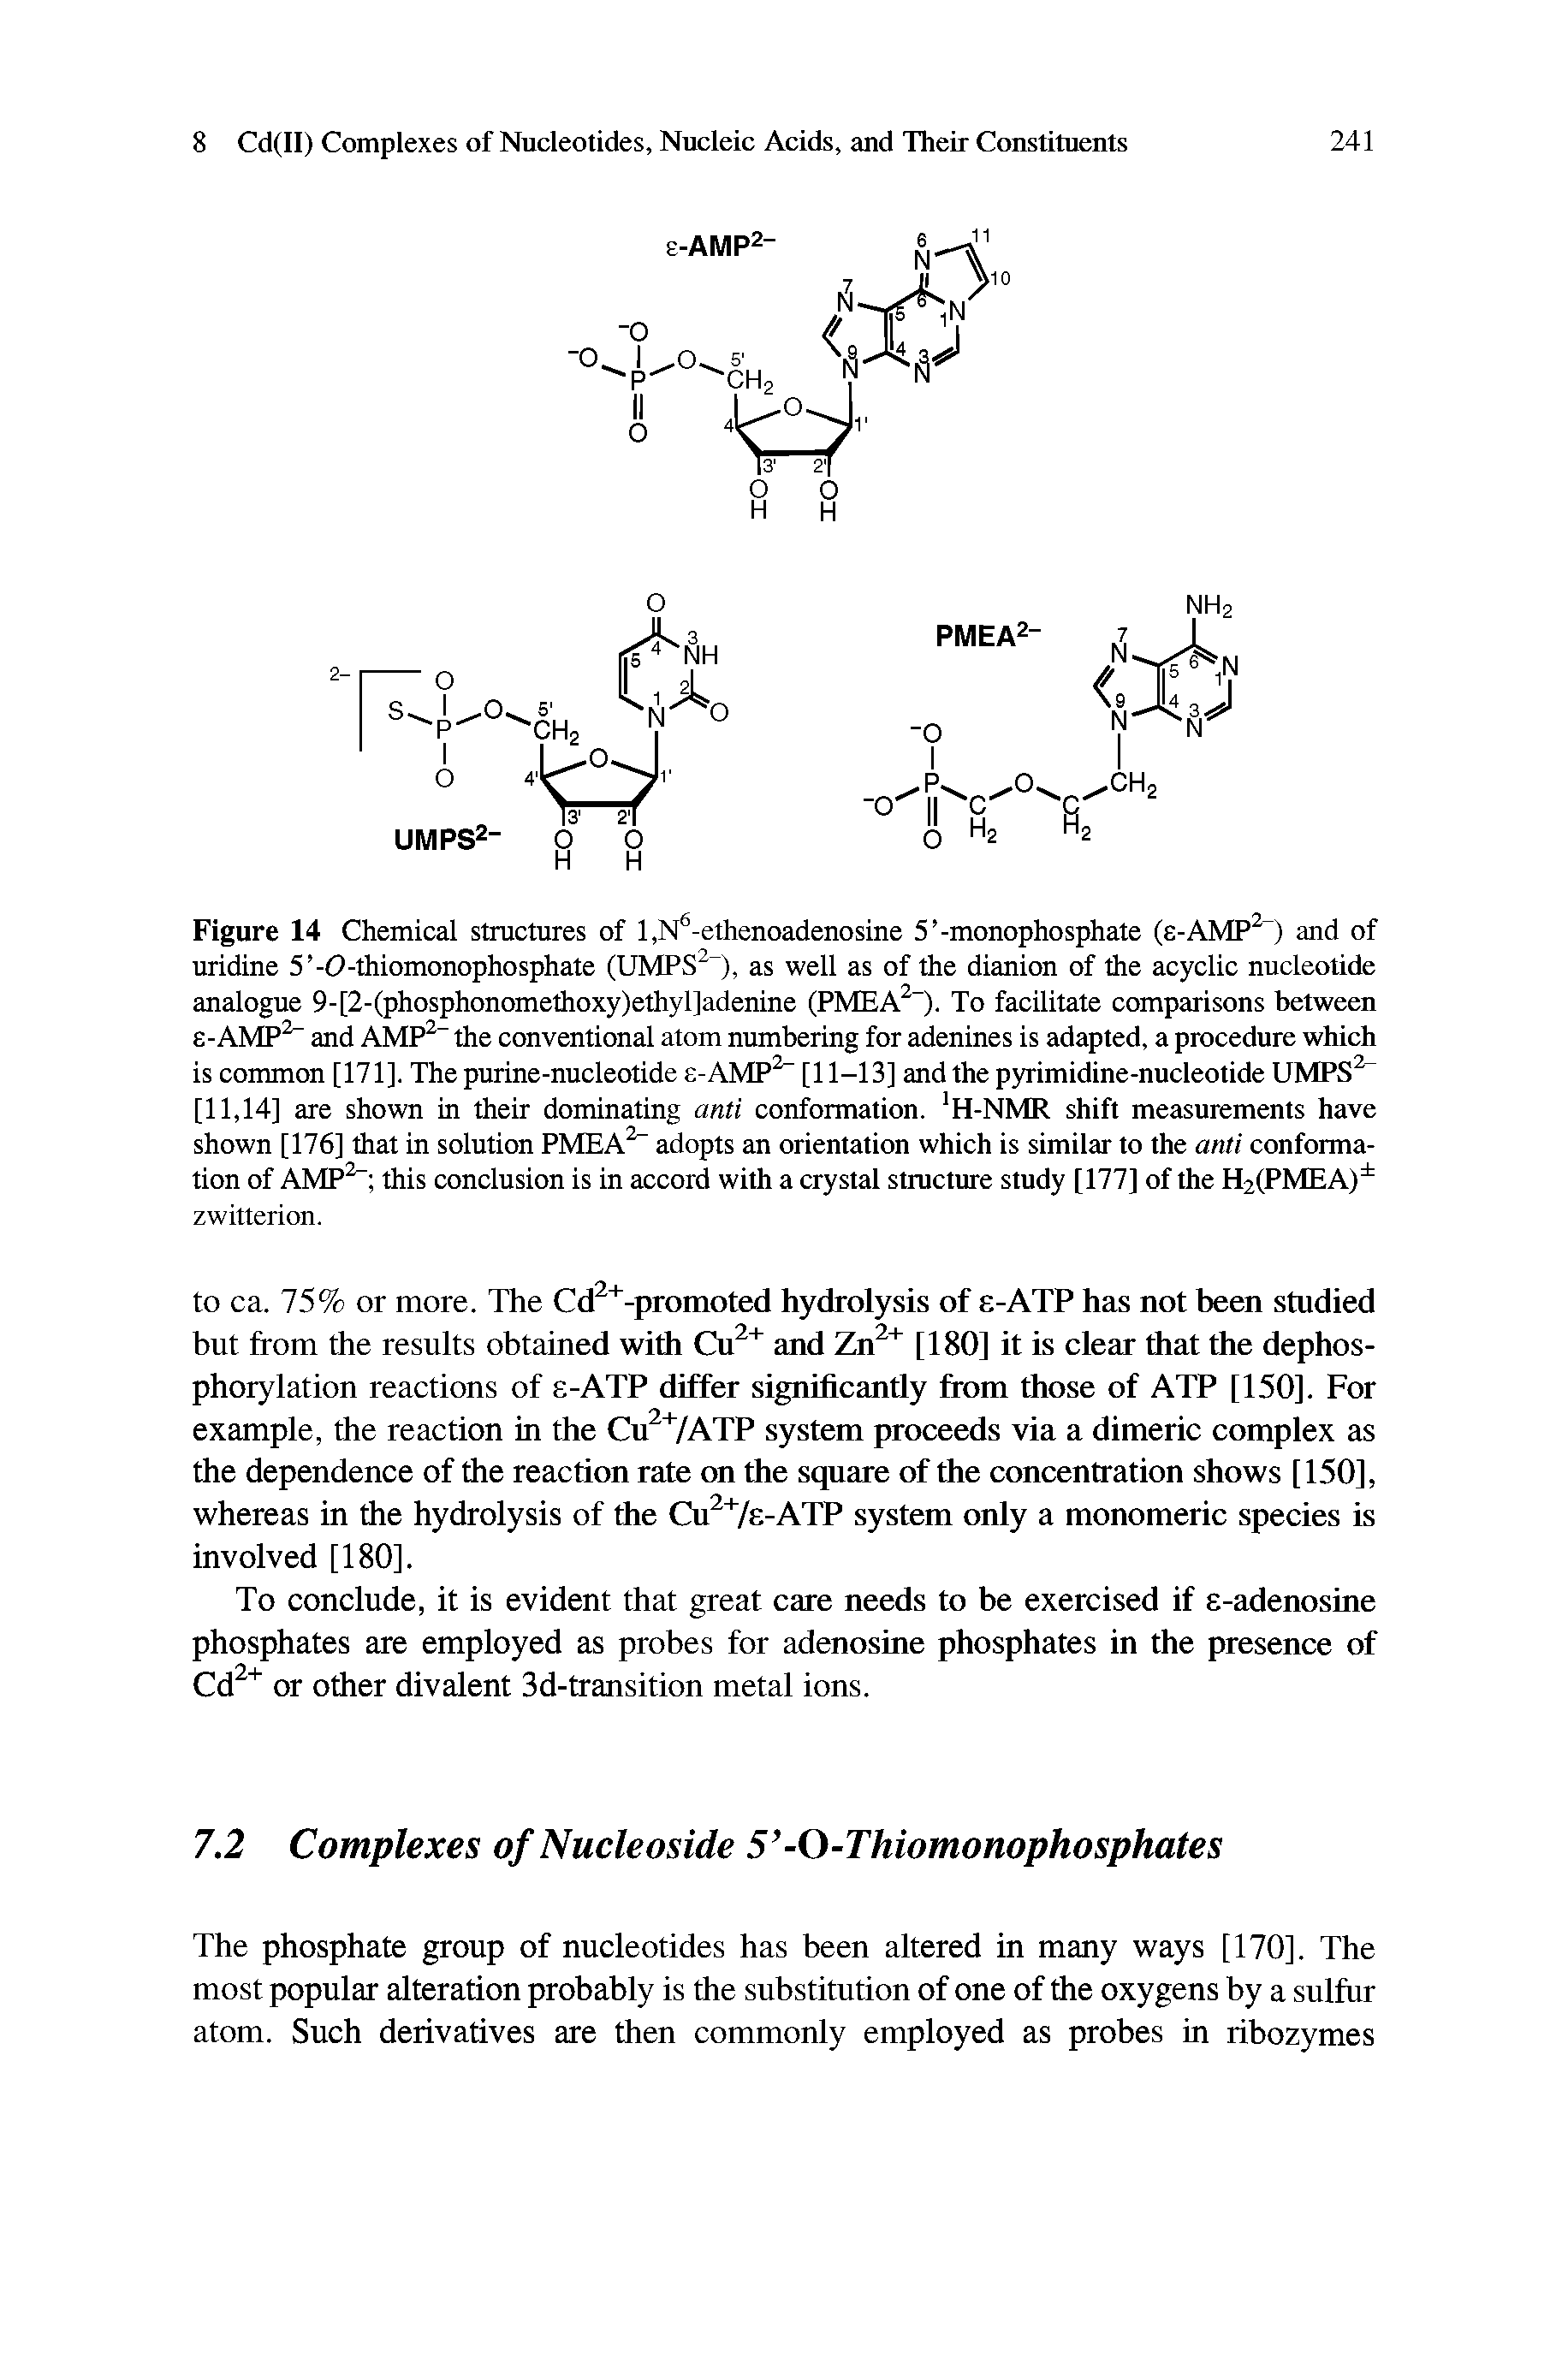 Figure 14 Chemical structures of l,N -ethenoadenosine 5 -monophosphate (8-AMP ) and of uridine 5 -0-thiomonophosphate (UMPS ), as well as of the dianion of the acyclic nucleotide analogue 9-[2-(phosphonomethoxy)ethyl]adenine (PMEA ). To facilitate comparisons between e-AMP and AMP the conventional atom numbering for adenines is adapted, a procedure which is common [171]. The purine-nucleotide e-AMP [11-13] and the pyrimidine-nucleotide UMPS [11,14] are shown in their dominating anti conformation. H-NMR shift measurements have shown [176] that in solution PMEA adopts an orientation which is similar to the anti conformation of AMP this conclusion is in accord with a crystal structure study [177] of the H2(PMEA) zwitterion.